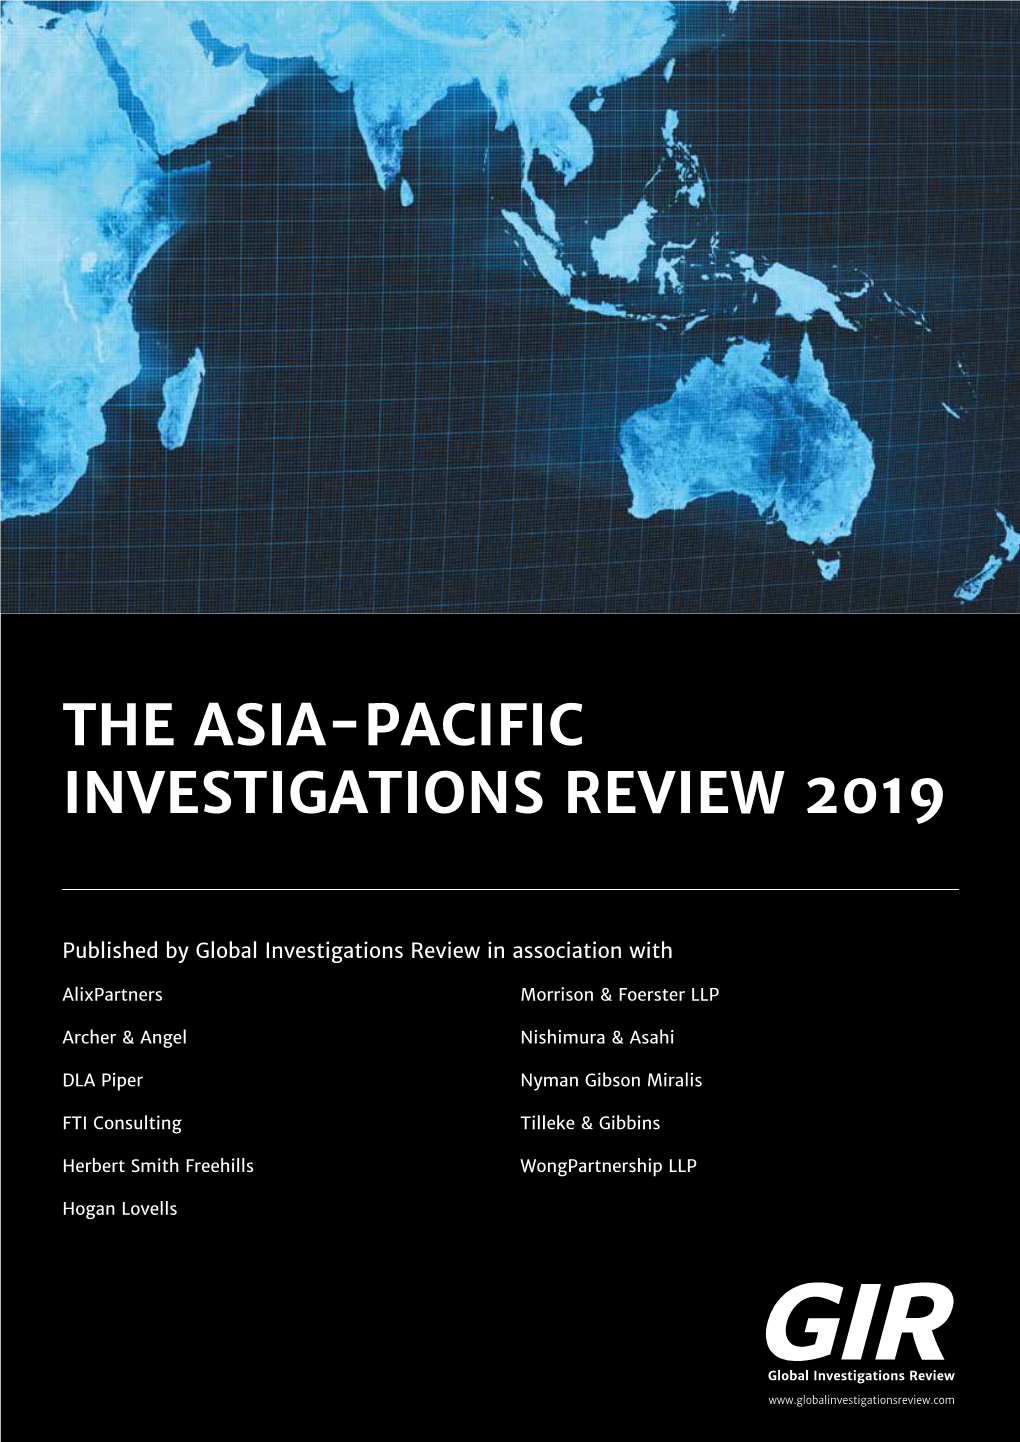 The Asia-Pacific Investigations Review 2019